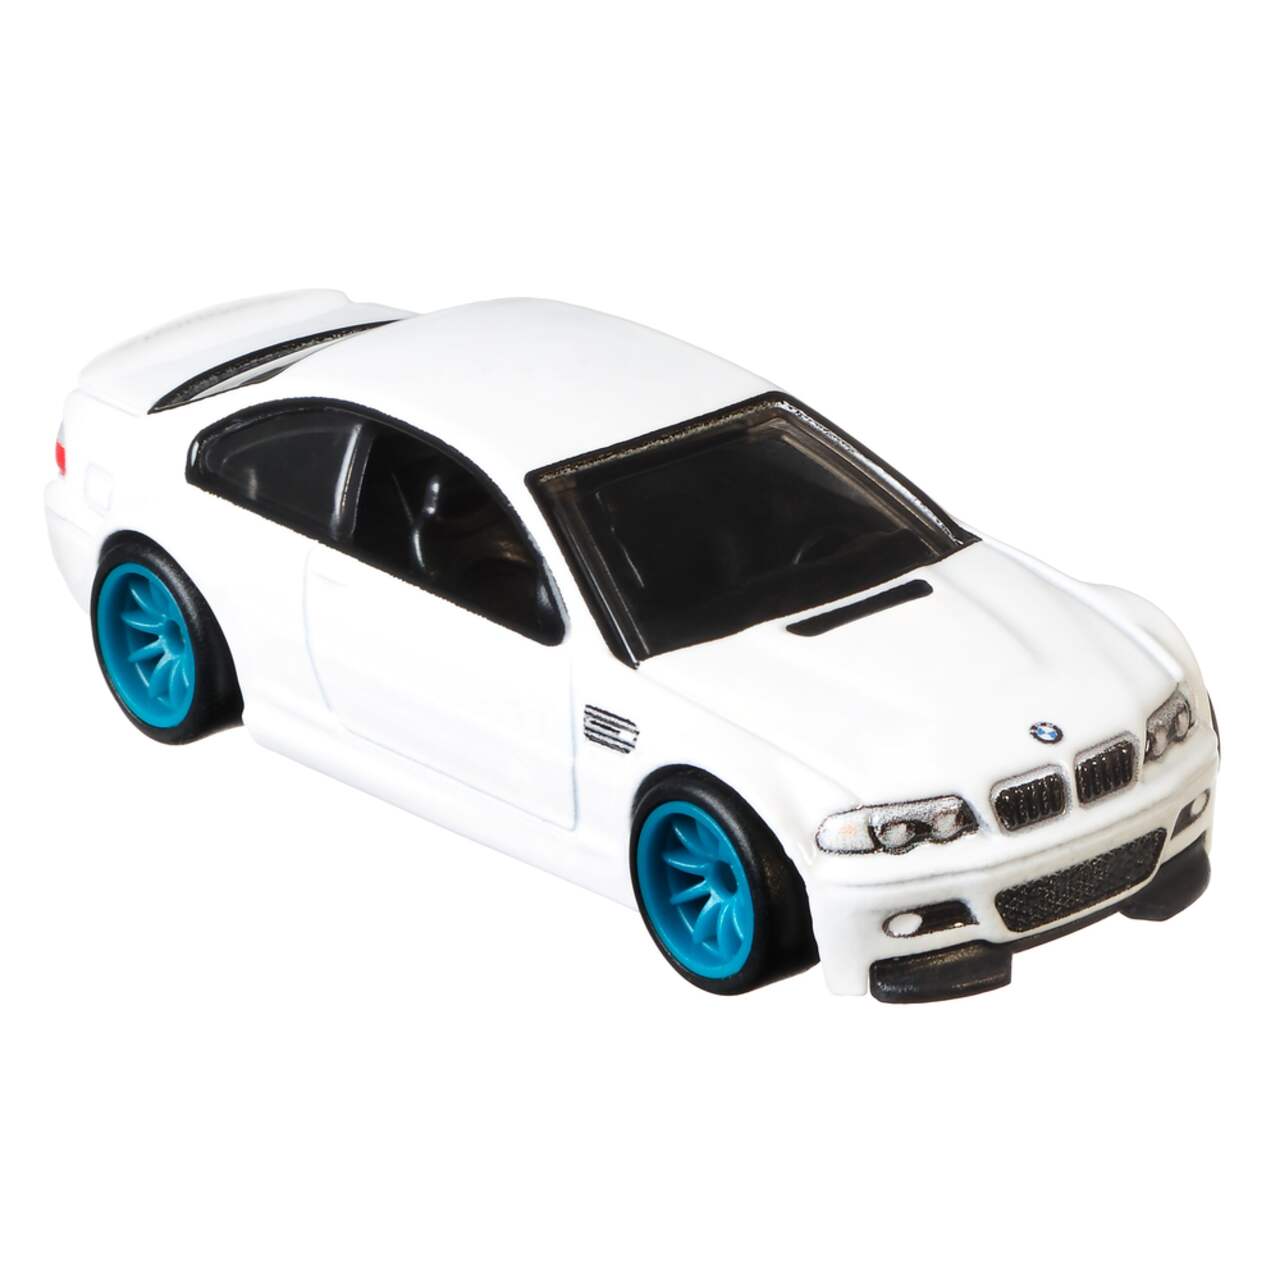 https://media-www.canadiantire.ca/product/seasonal-gardening/toys/toys-games/0508496/hot-wheels-fast-furious-assorted-vehicles-0f225790-6f61-467d-9c43-a2f445d304c0.png?imdensity=1&imwidth=640&impolicy=mZoom